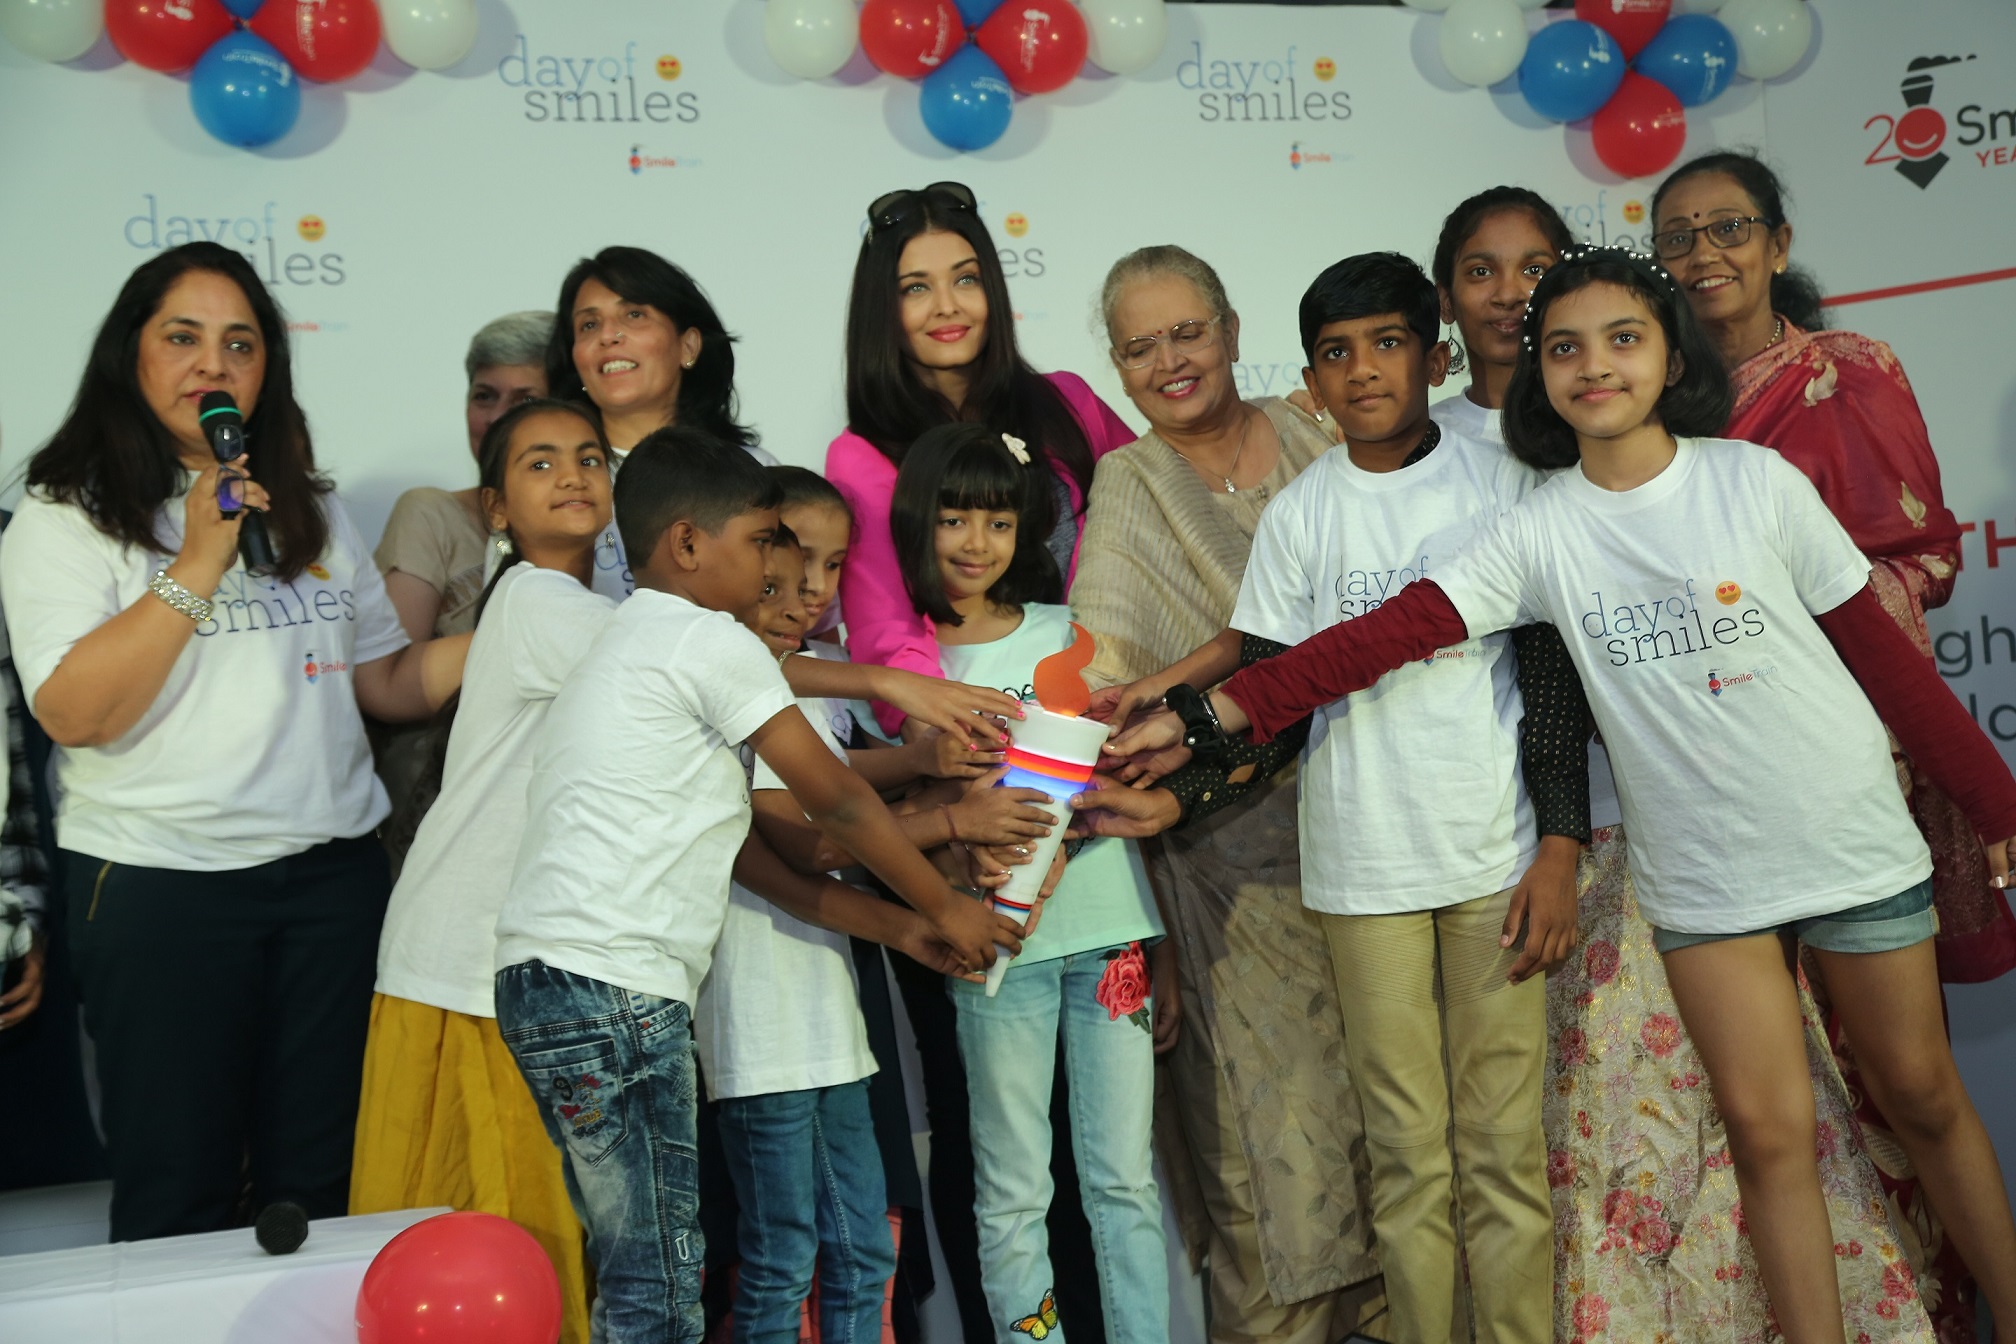 Aishwarya Rai Bachchan, Smt Vrinda Rai and Aaradhya Bachchan celebrates ‘Day Of Smiles’ with Smile Train India at the Narayana Health SRCC Children’s Hospital, at Haji Ali, Worli in Mumbai today on the occasion of her Late father’s Birthday. The family spent time with cleft patients and encouraged them to live full lives and pursue their dreams -Photo By Sachin Murdeshwar GPN